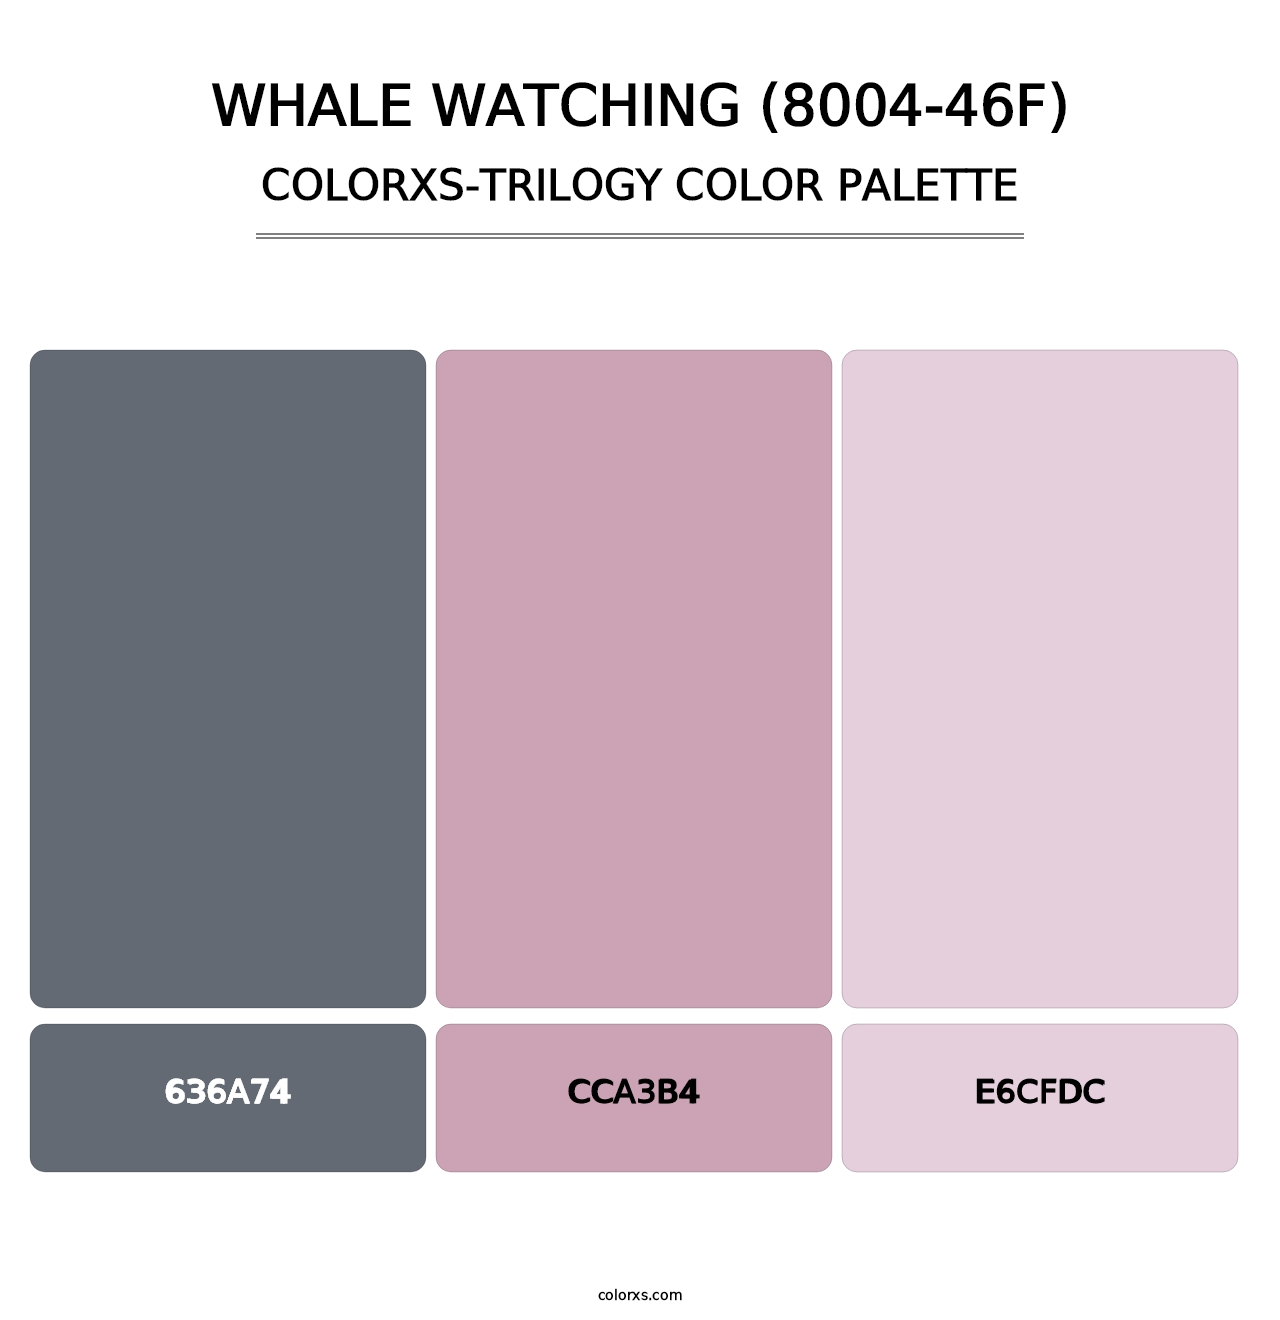 Whale Watching (8004-46F) - Colorxs Trilogy Palette